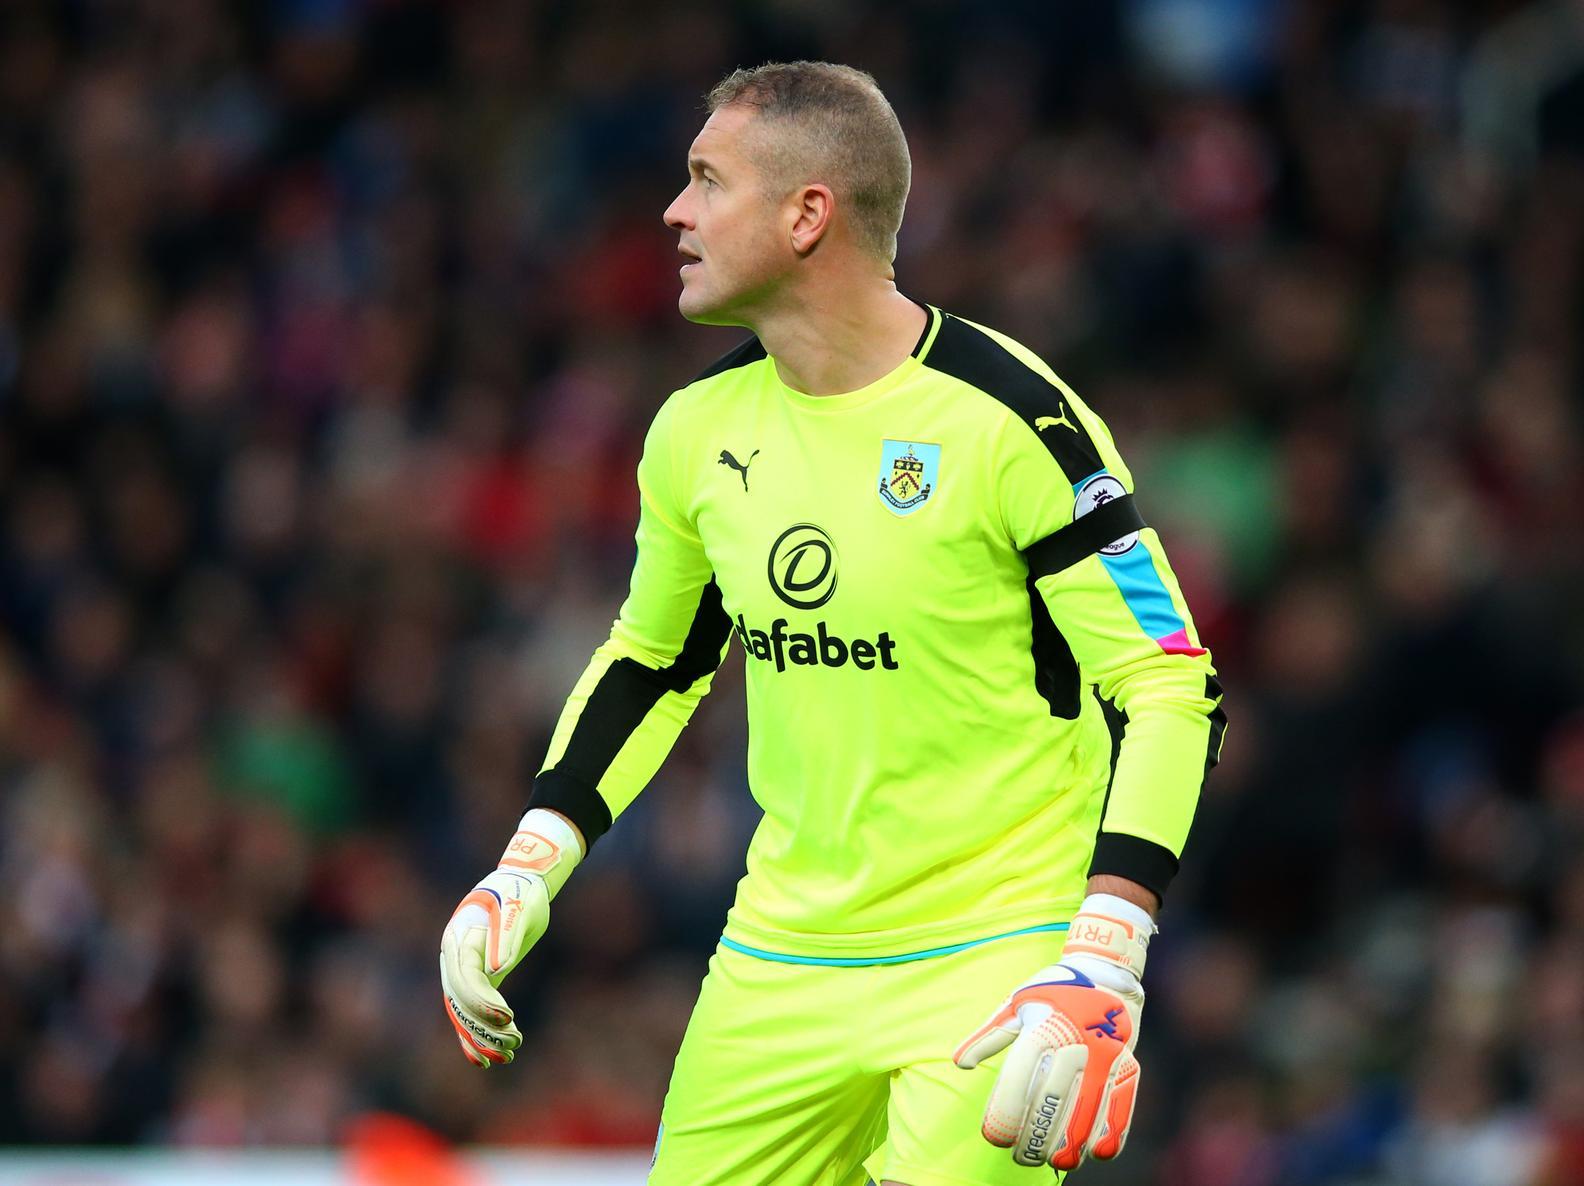 The goalkeeper only made three starts for the Clarets in 18 months at Turf Moor - featuring against Manchester City, Stoke City and Swansea City - but provided competition for Tom Heaton and helped aid Nick Pope's development.